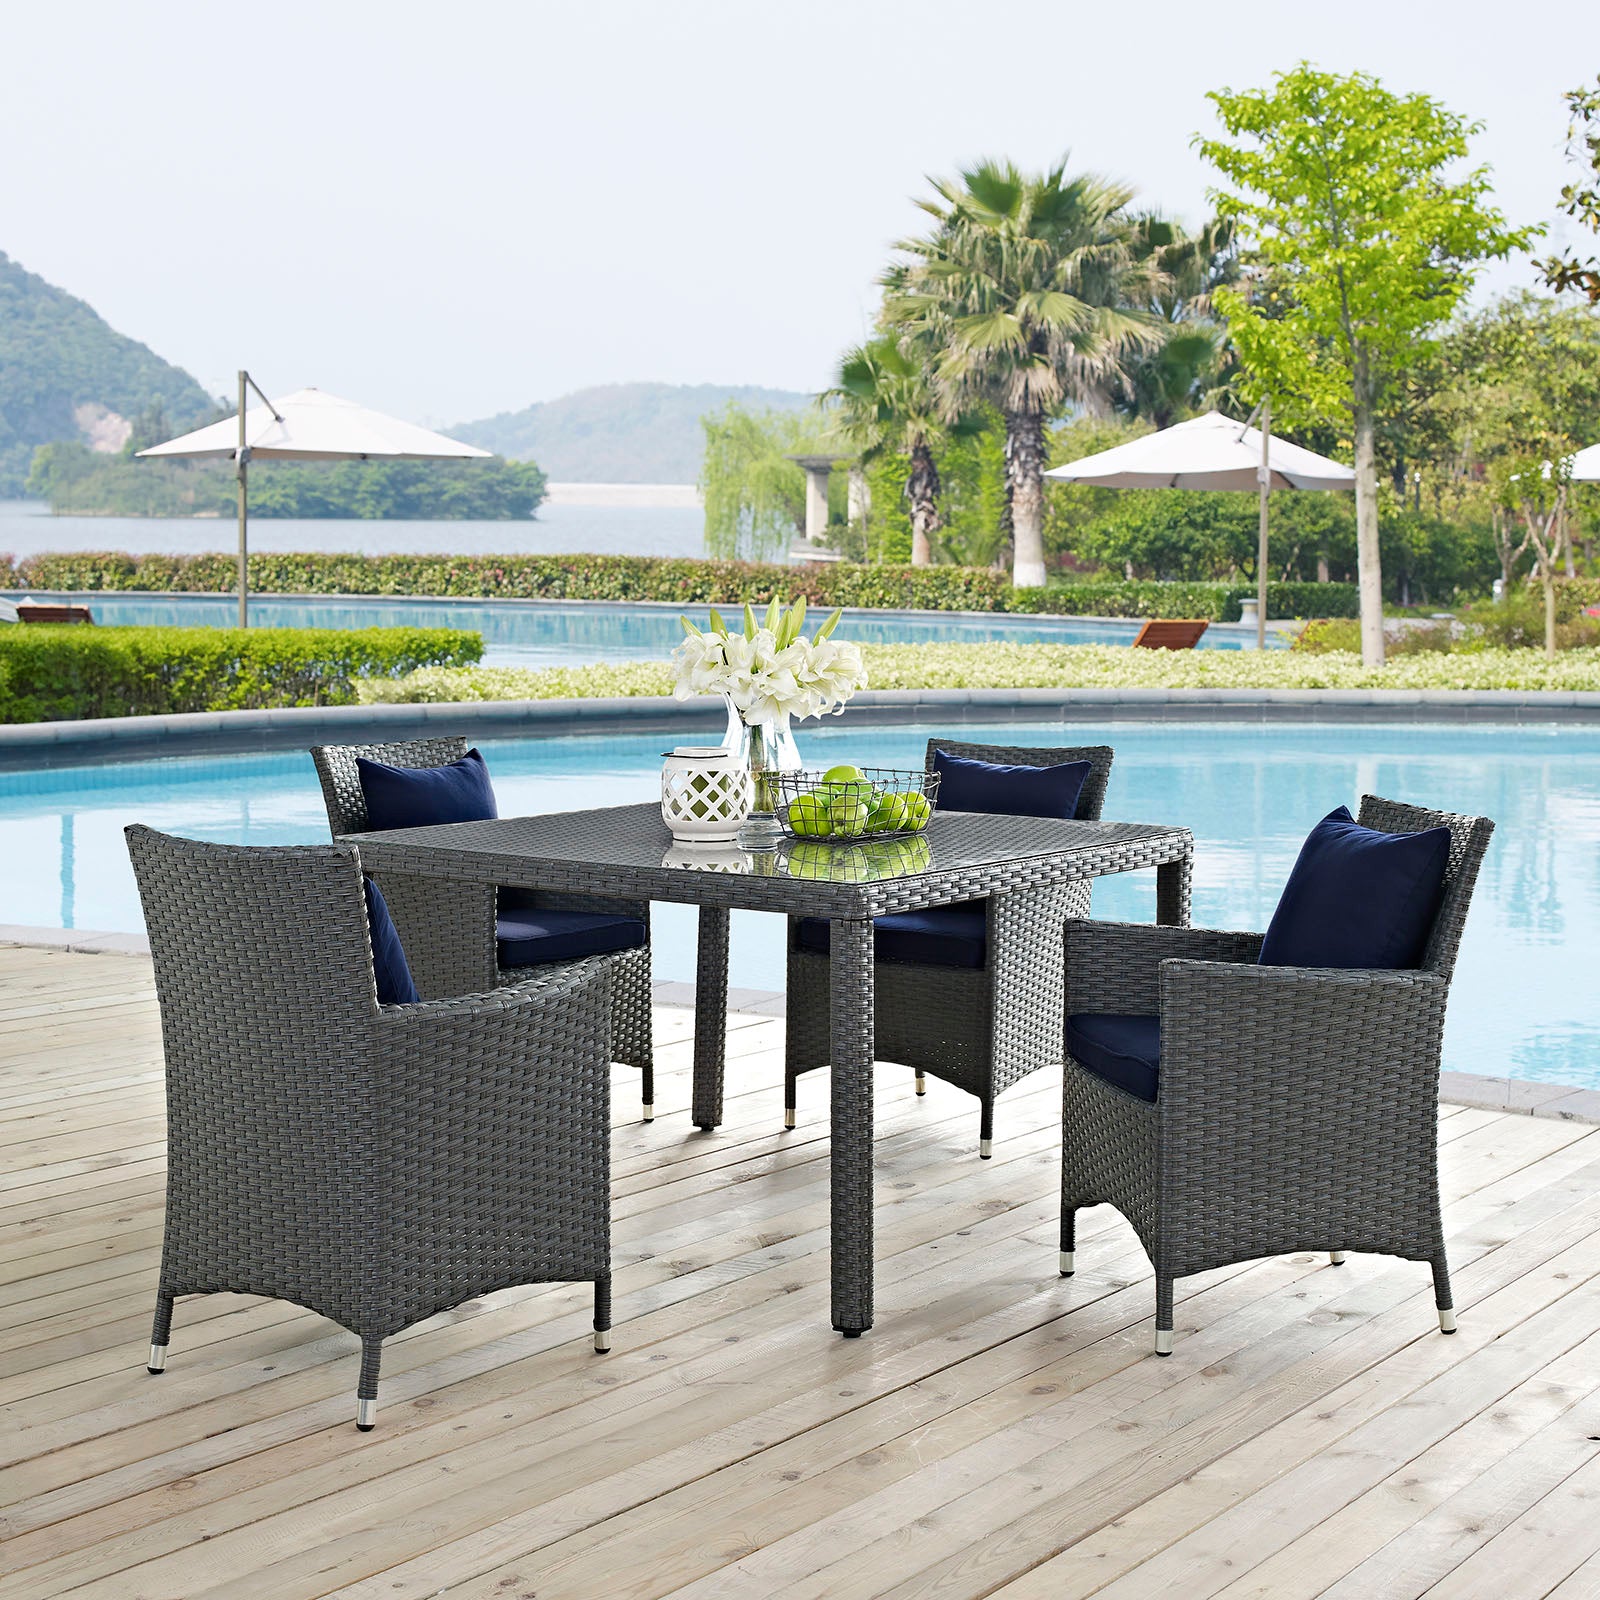 Sojourn 4 Piece Outdoor Patio Sunbrella® Dining Set - East Shore Modern Home Furnishings